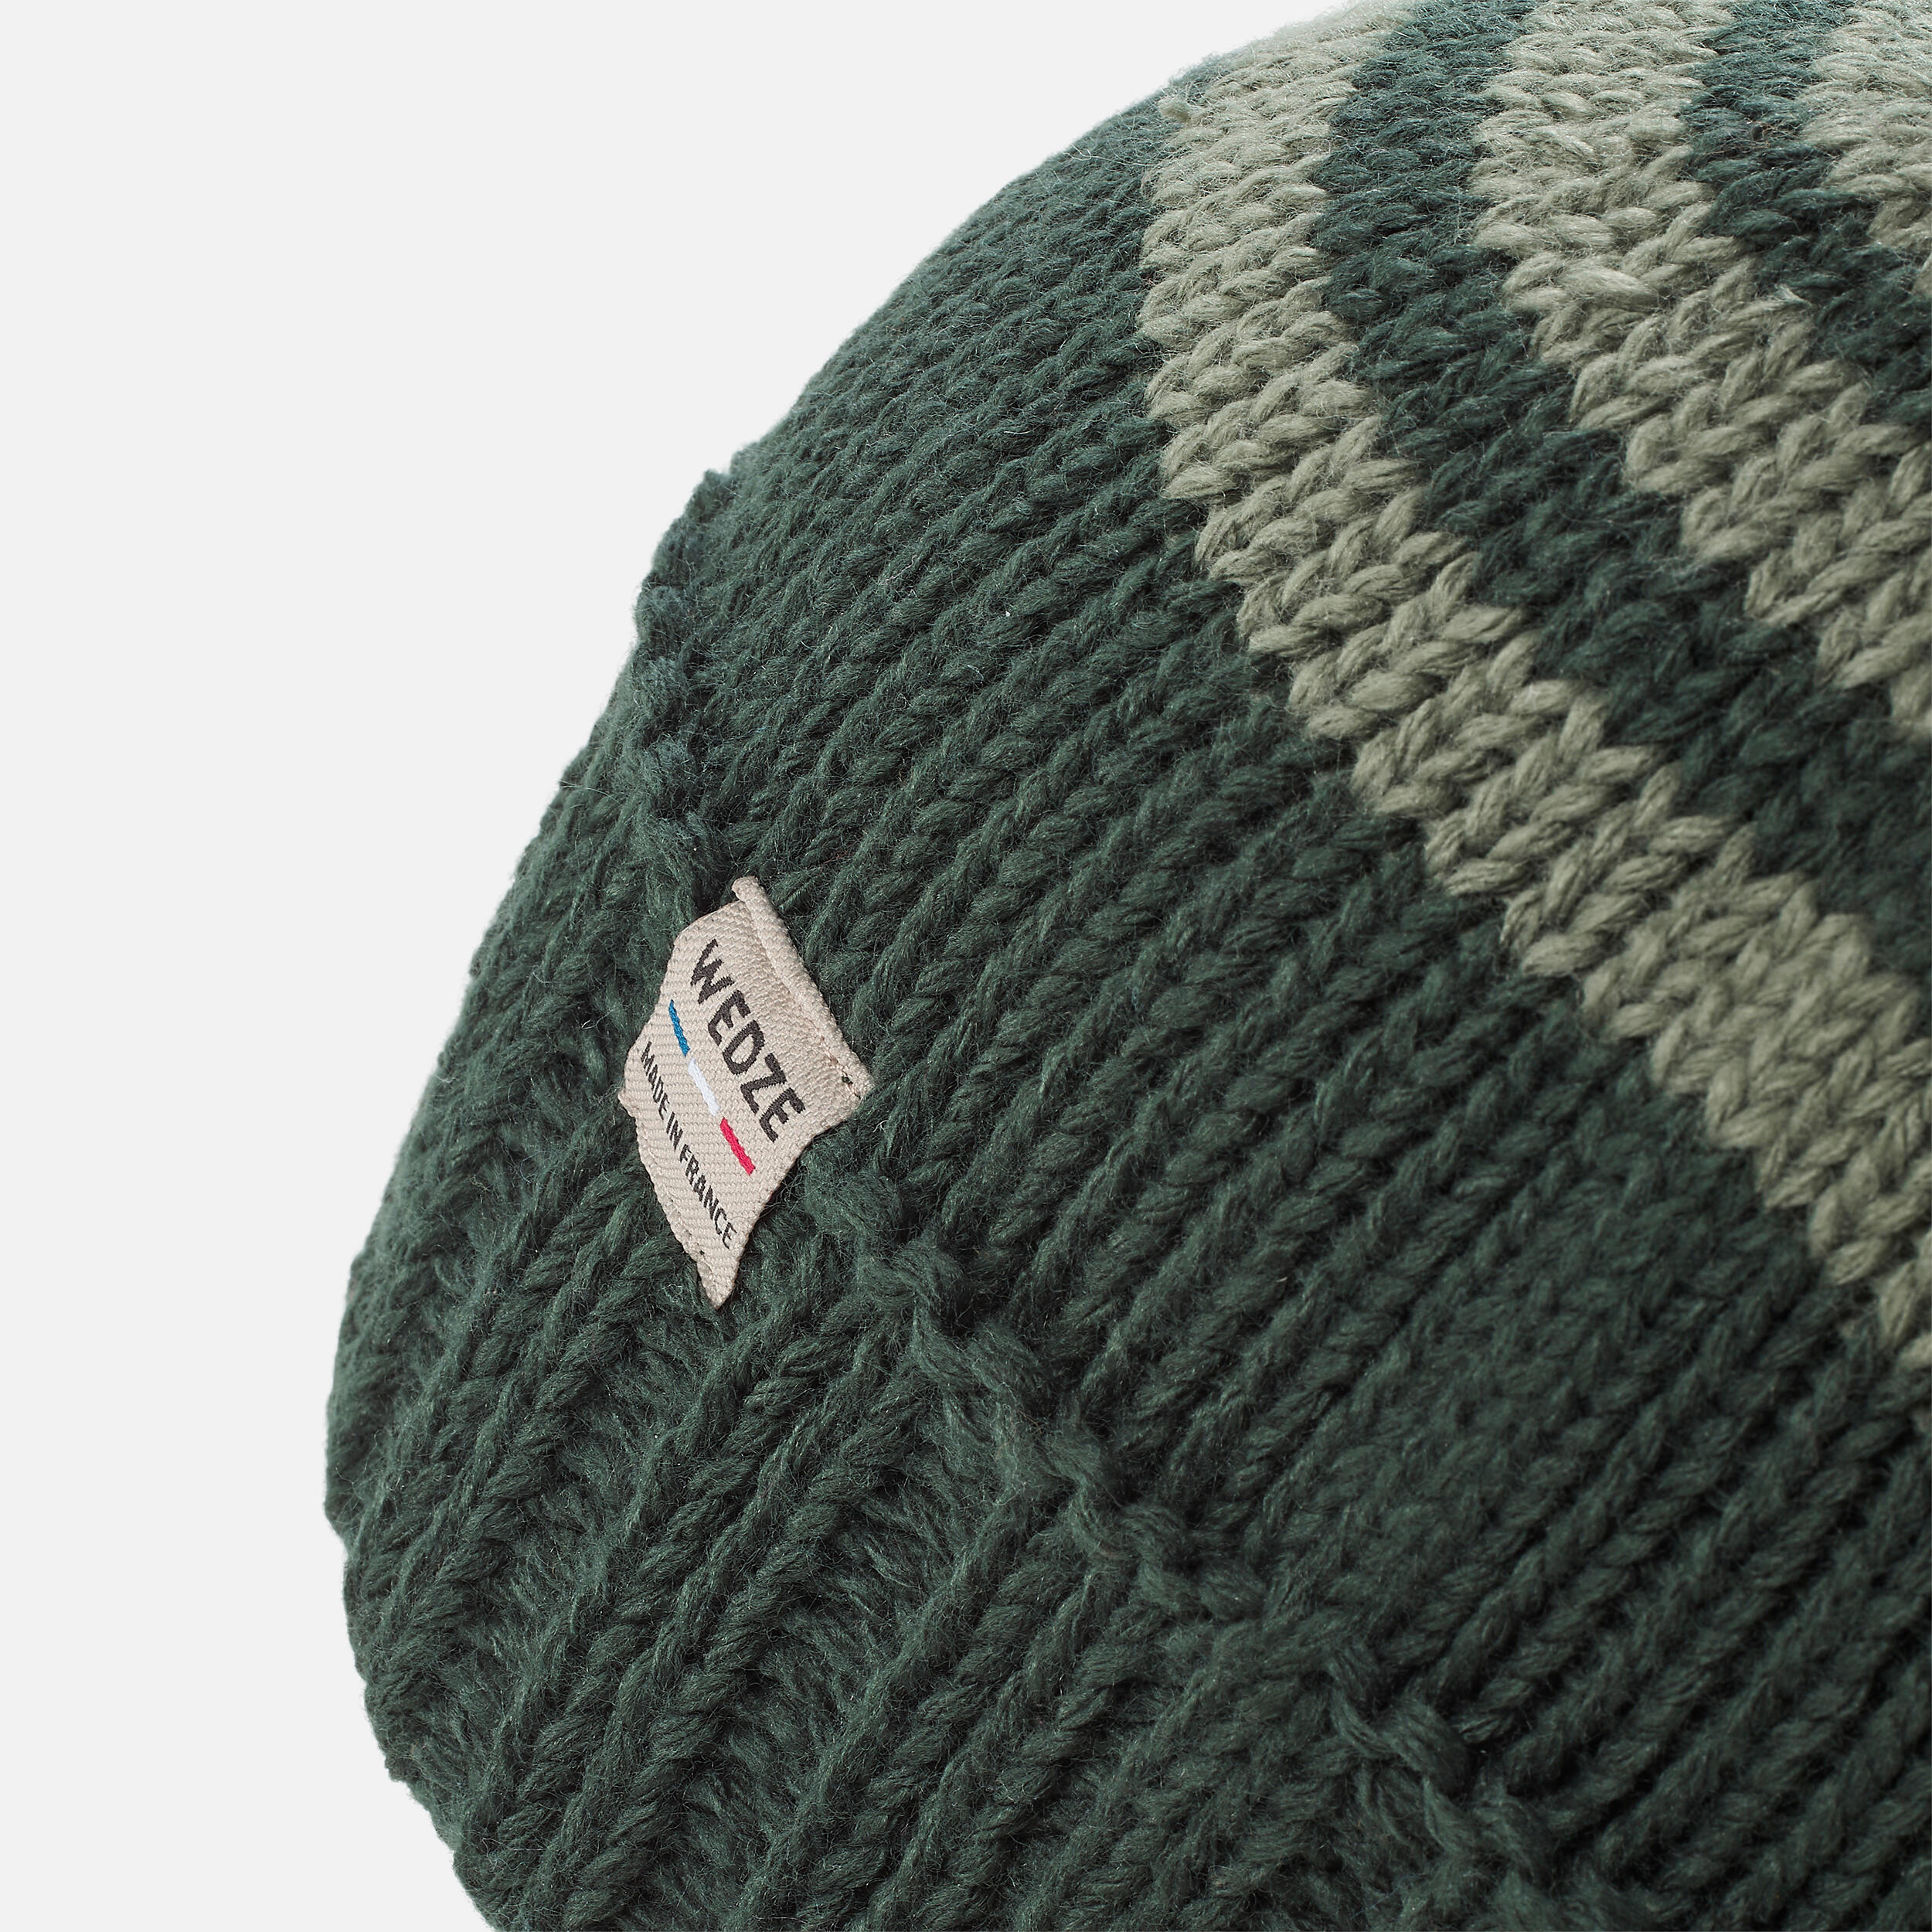 ADULT SKI HAT GRAND NORD MADE IN FRANCE - GREEN 4/7